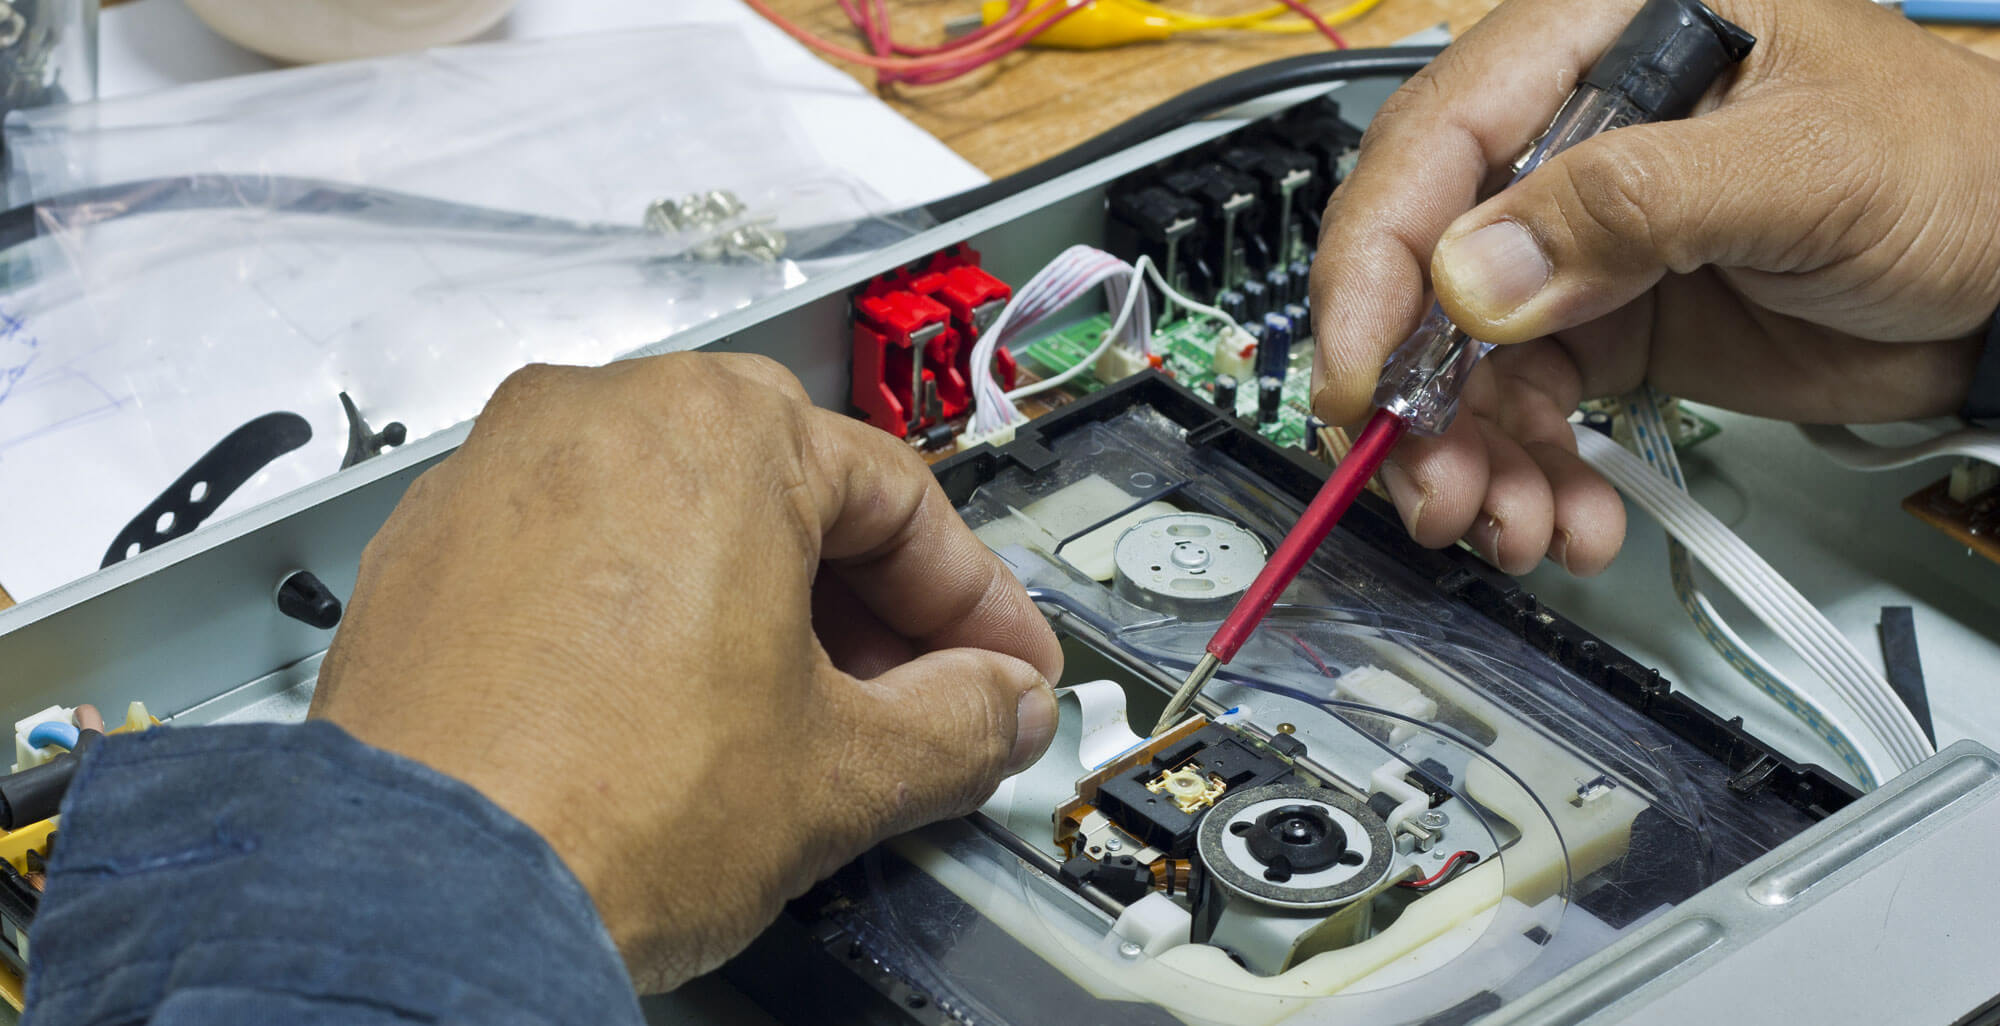 Reducing Waste and Loss: The Cost-Efficiency of Quality Control in Repair